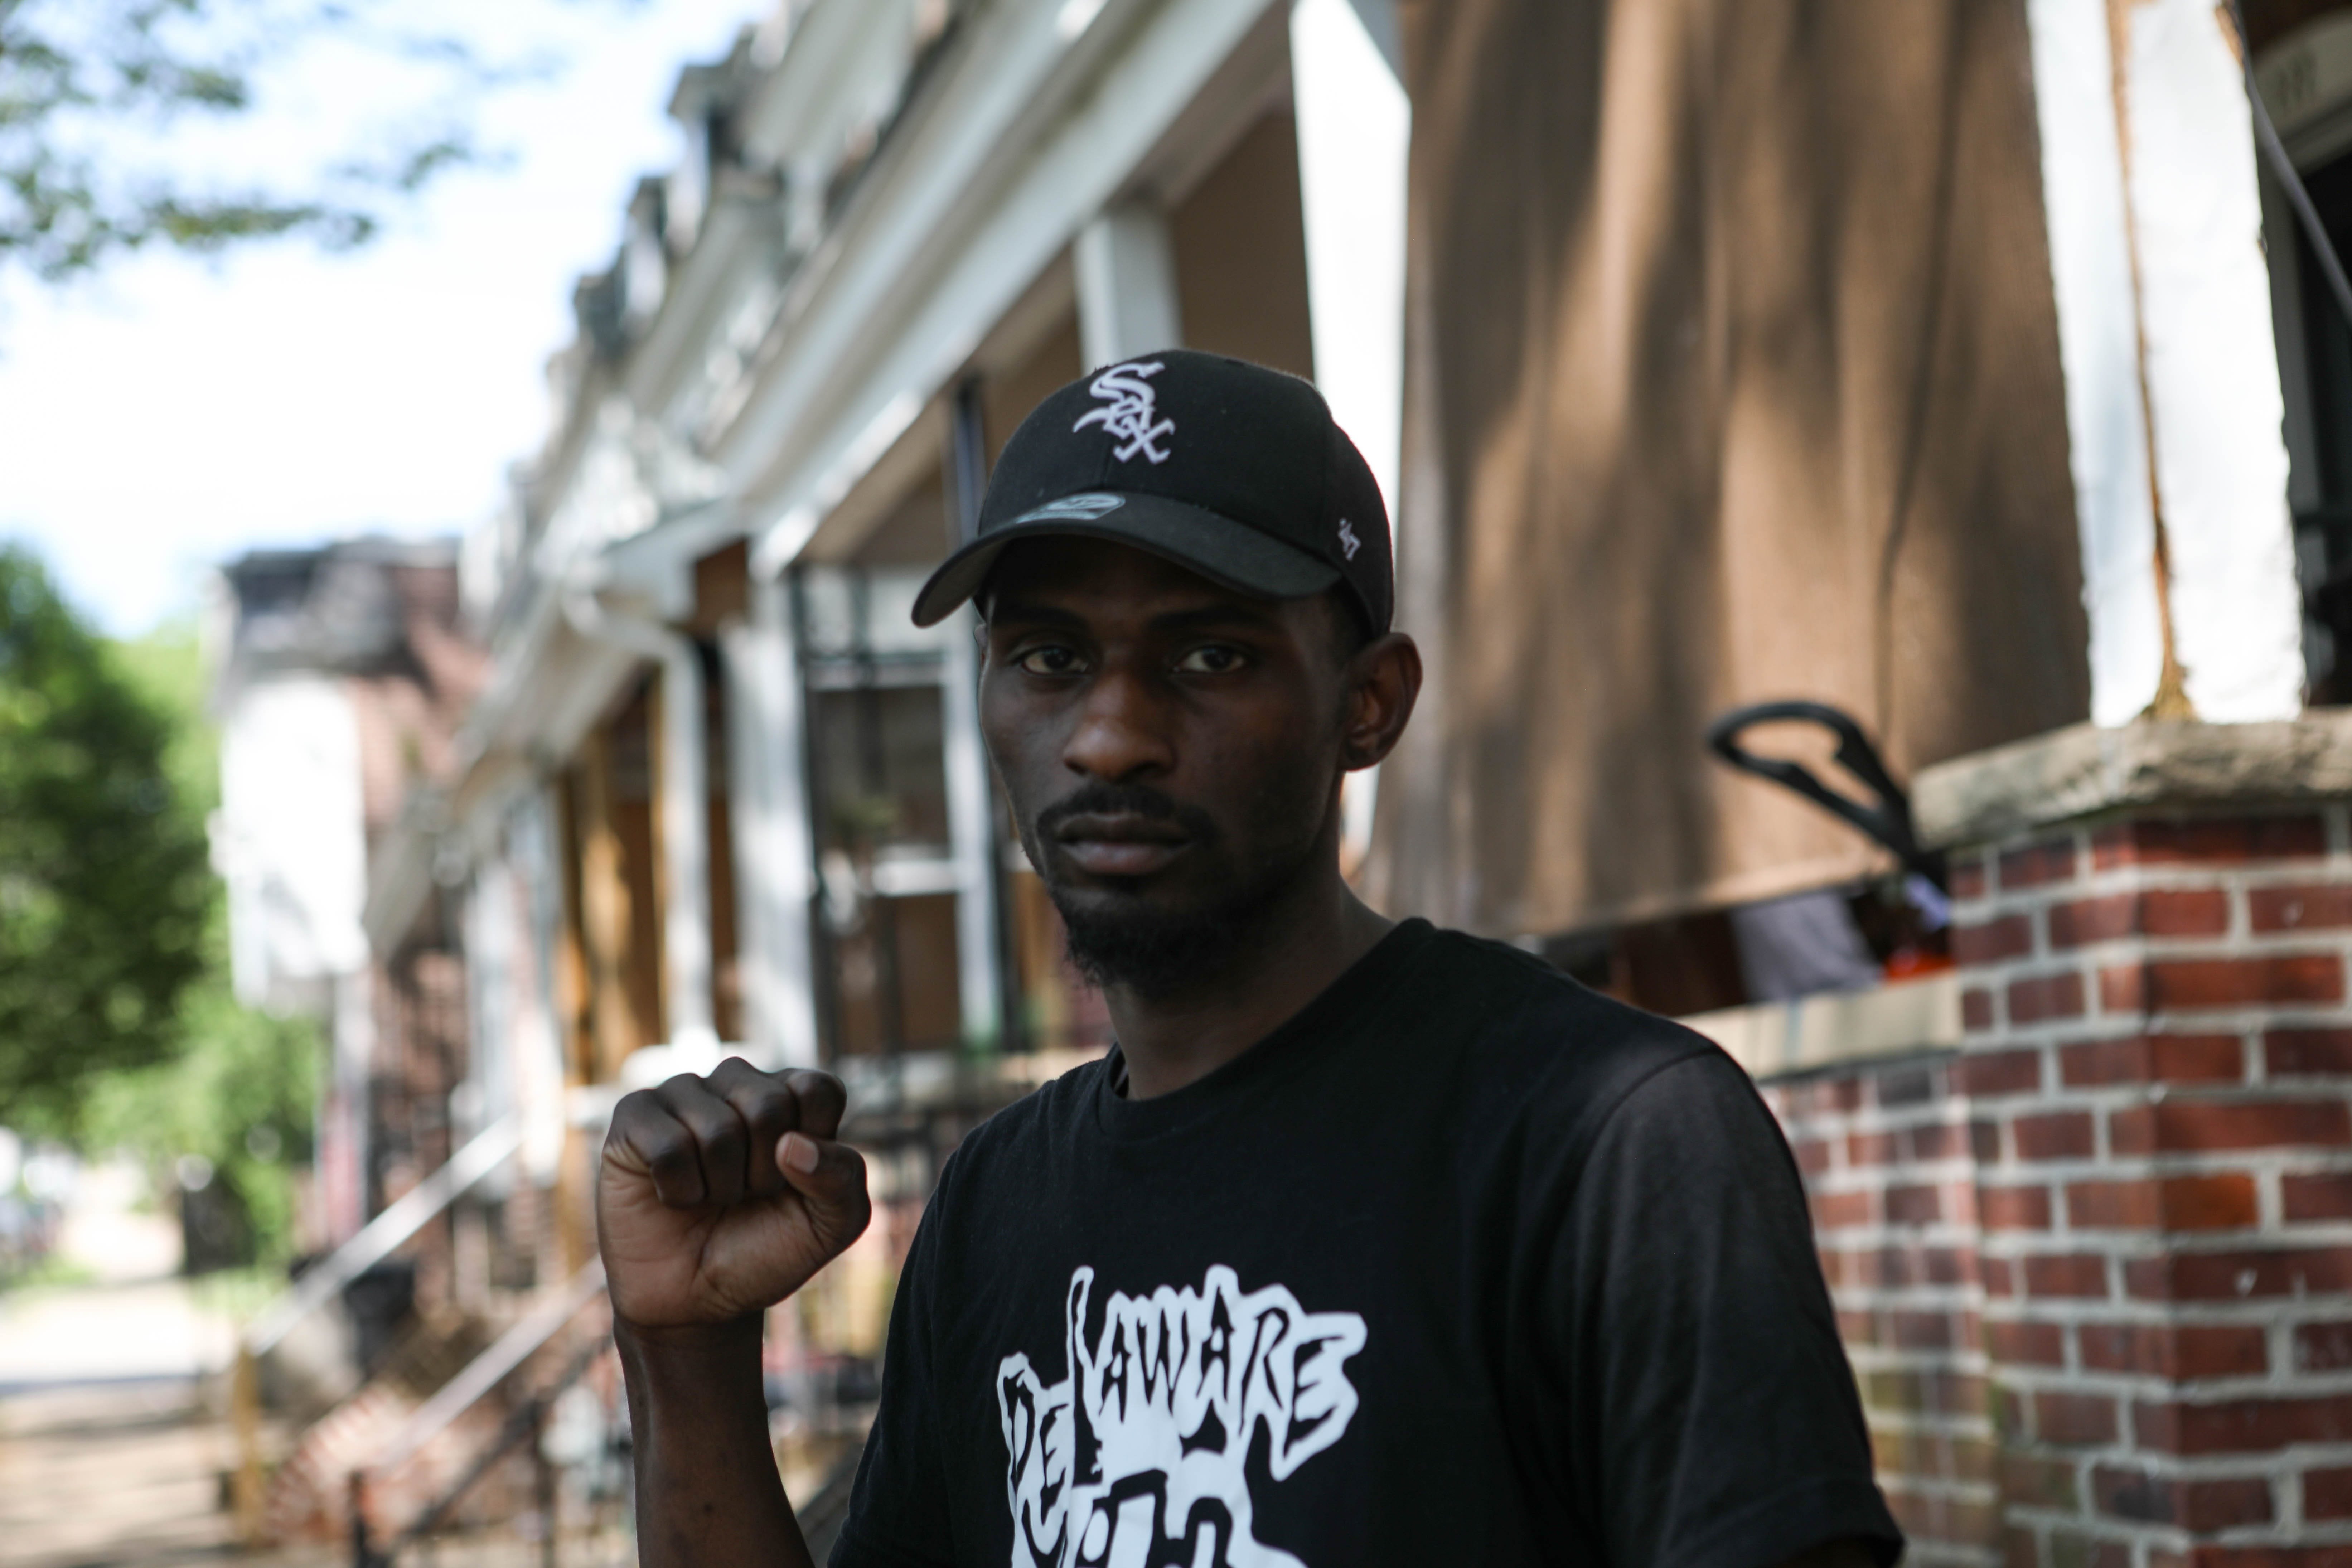 Dorell Reynolds poses for a portrait in Wilmington on Thursday, June 3, 2020. Reynolds said at first he didn't support looting during Saturday's protest against police violence, but later changed his mind. "If you don't want to give us change we're gonna continue to riot," he said.